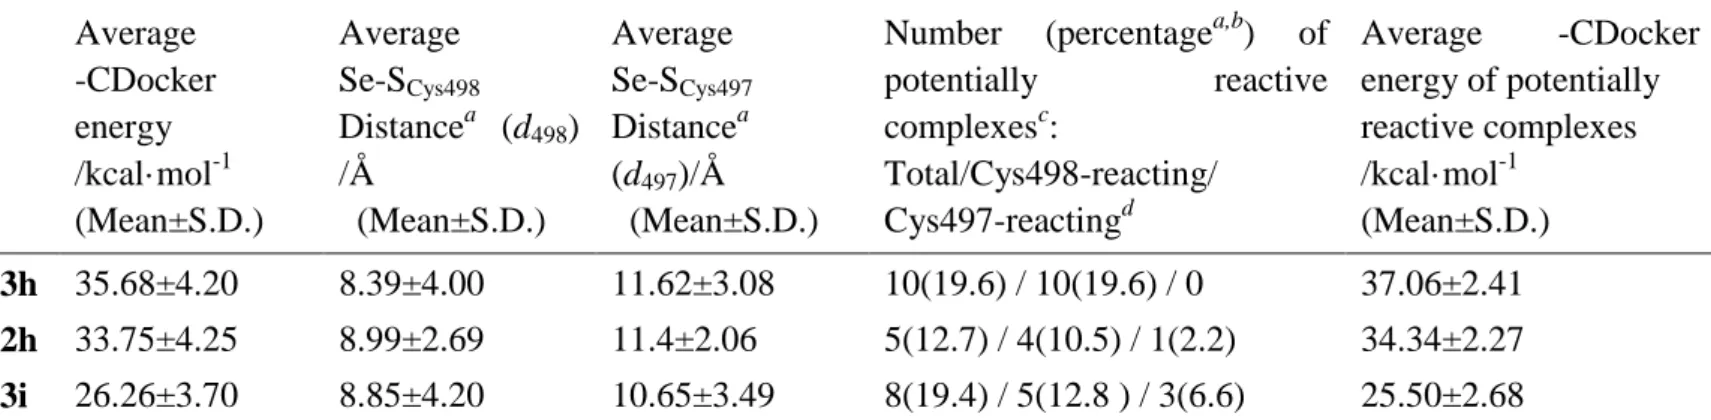 Table 4. Analysis of the flexible docking poses clustered by featured compound  Average    -CDocker  energy  /kcal·mol -1  (Mean±S.D.)  Average Se-S Cys498Distancea   (d 498 ) /Å   (Mean±S.D.)  Average Se-S Cys497Distancea(d497)/Å    (Mean±S.D.)   